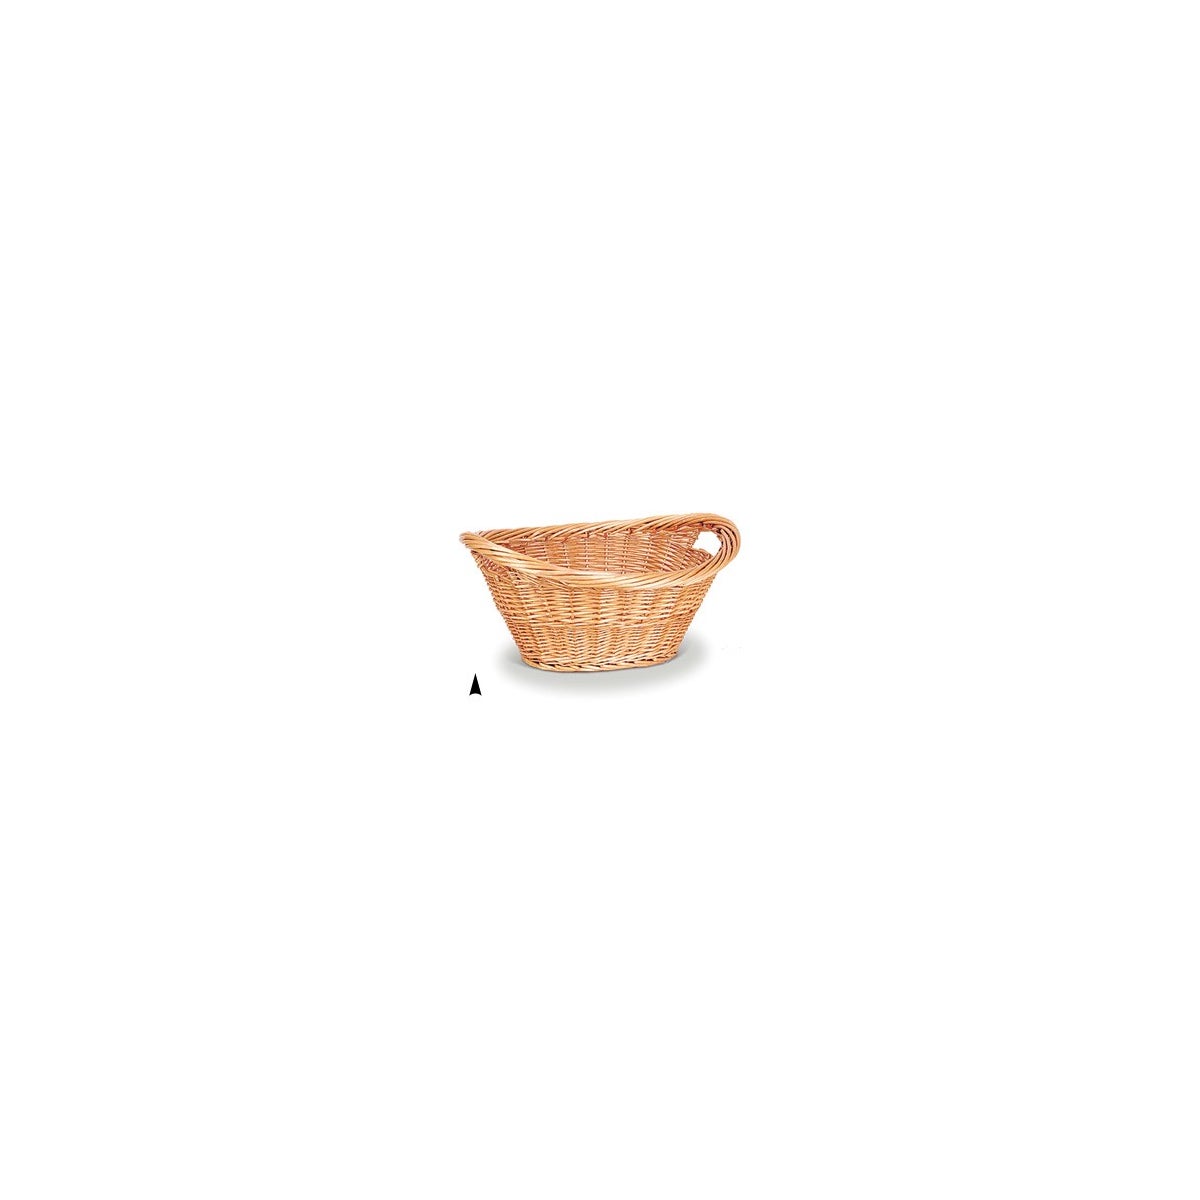 885/31B OVAL STAINED WILLOW LAUNDRY BASKET CS. PK.: 15